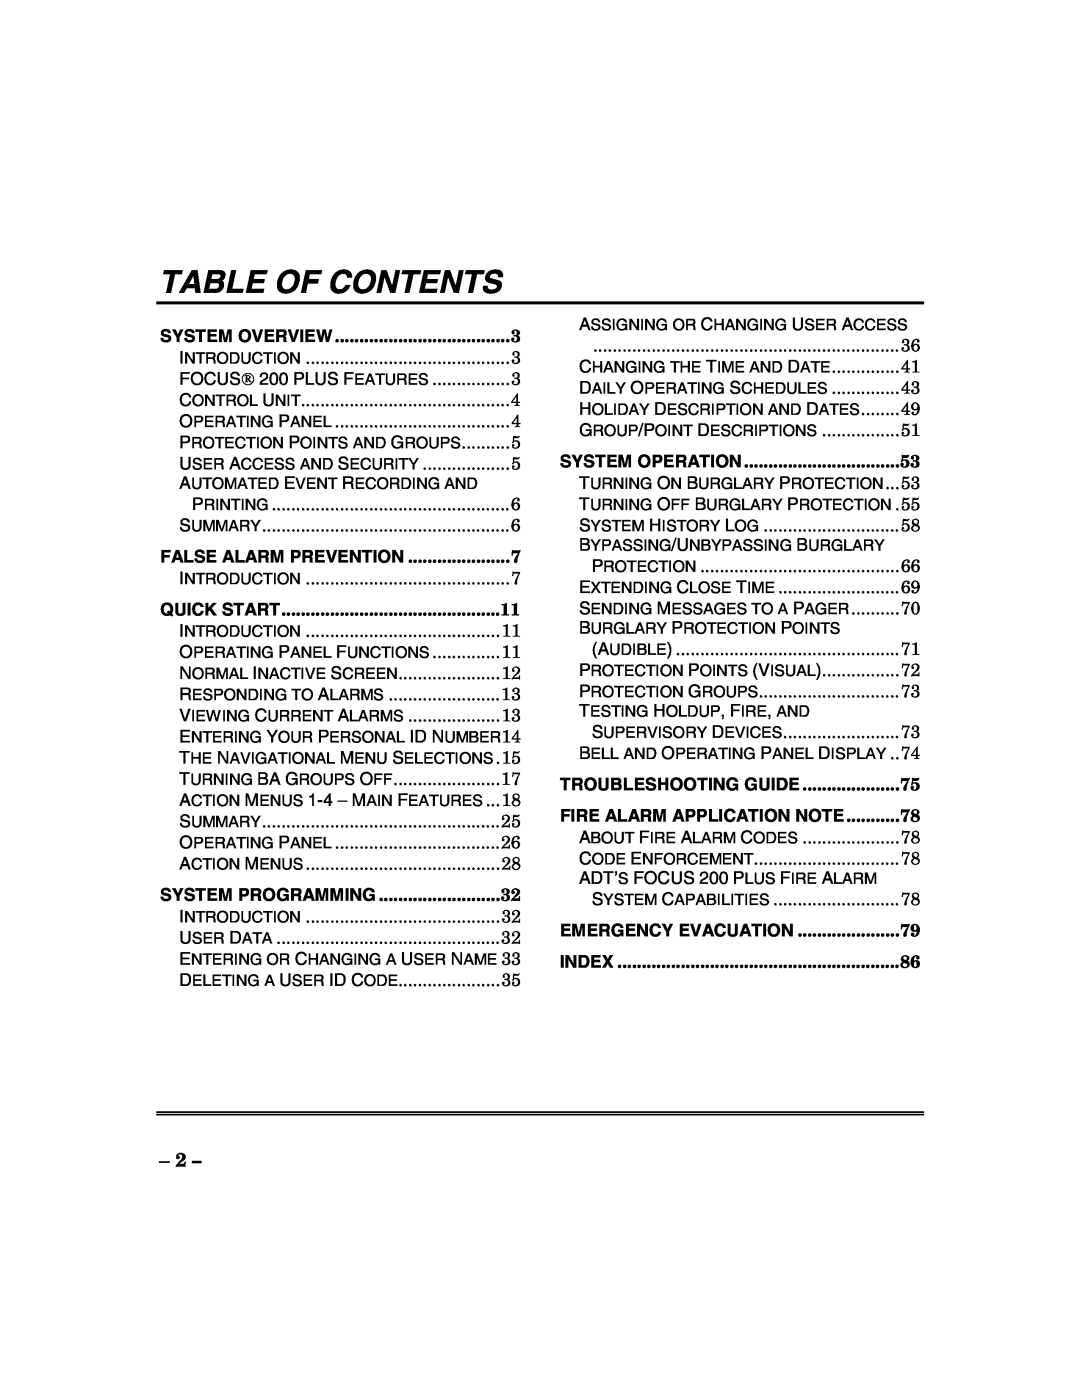 ADT Security Services 200 Plus Table Of Contents, System Overview, False Alarm Prevention, Quick Start, System Programming 